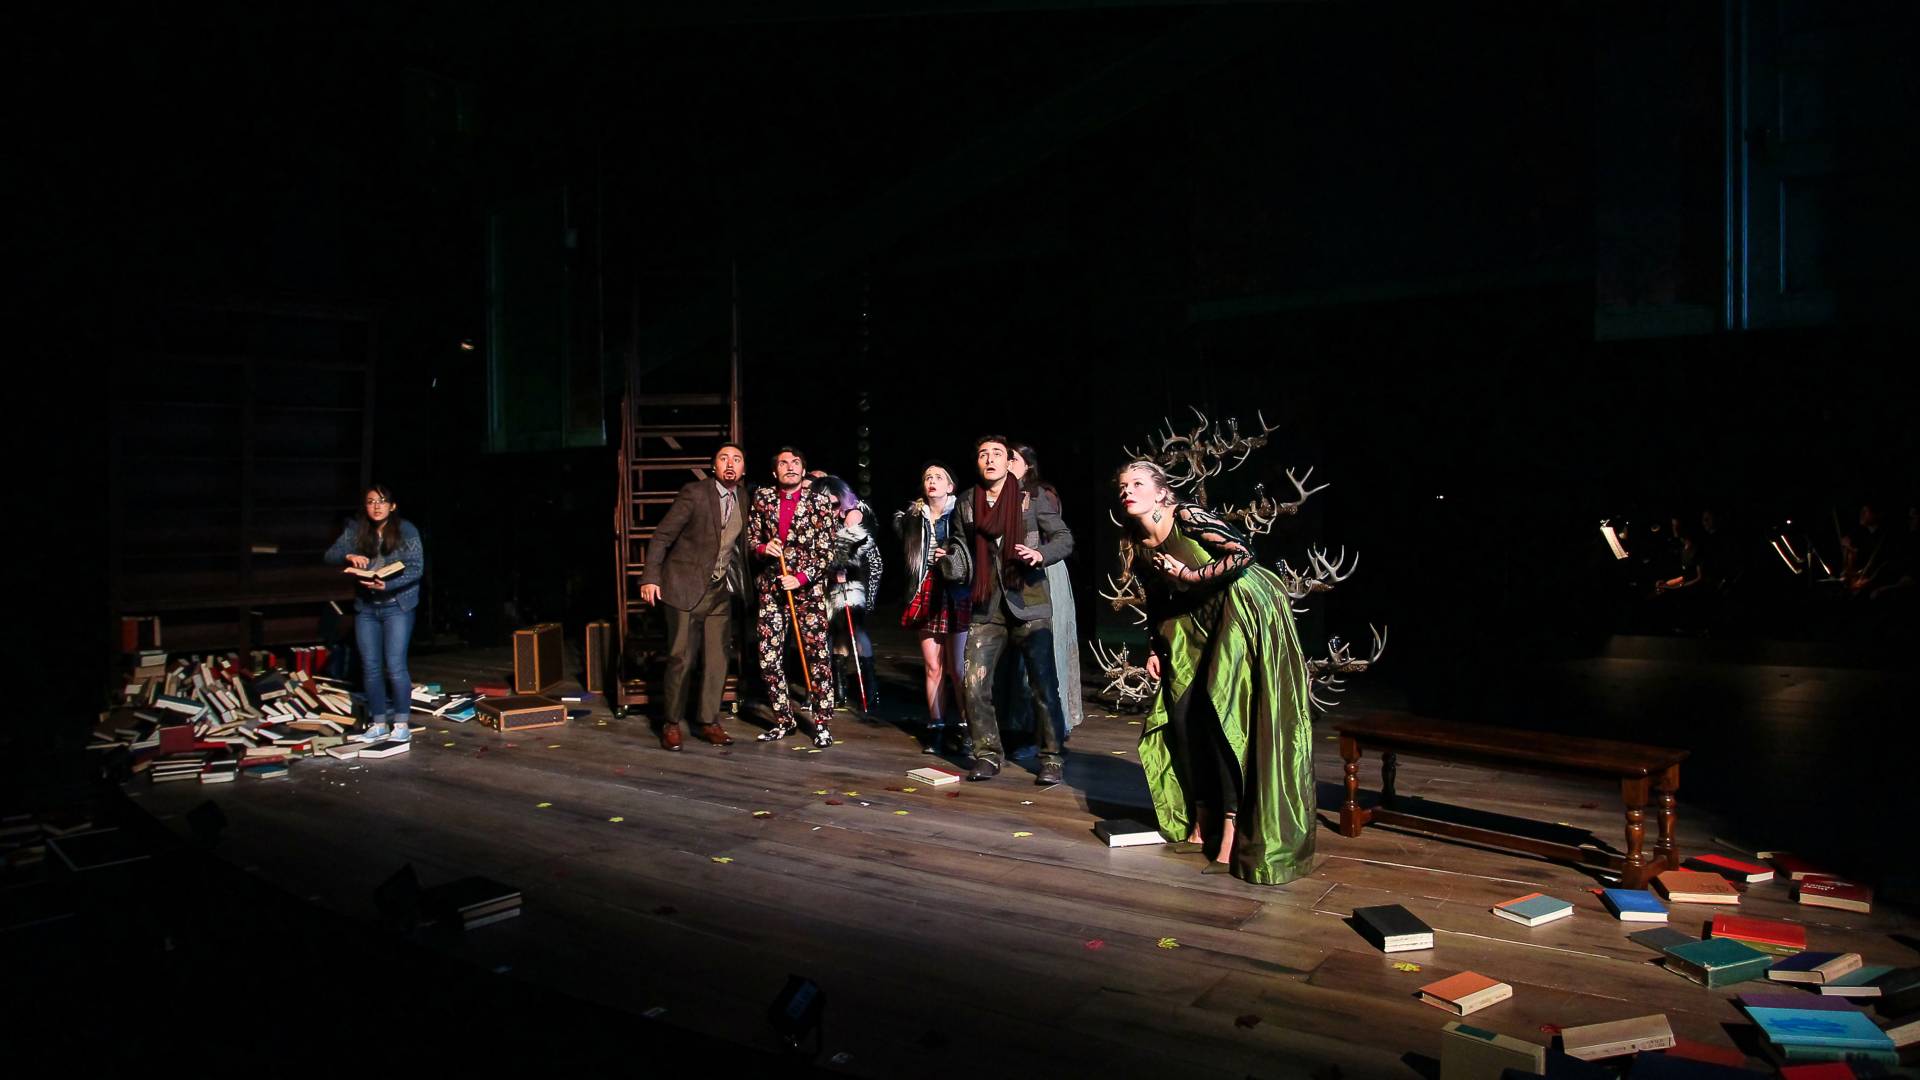 Scene from the musical Into The Woods